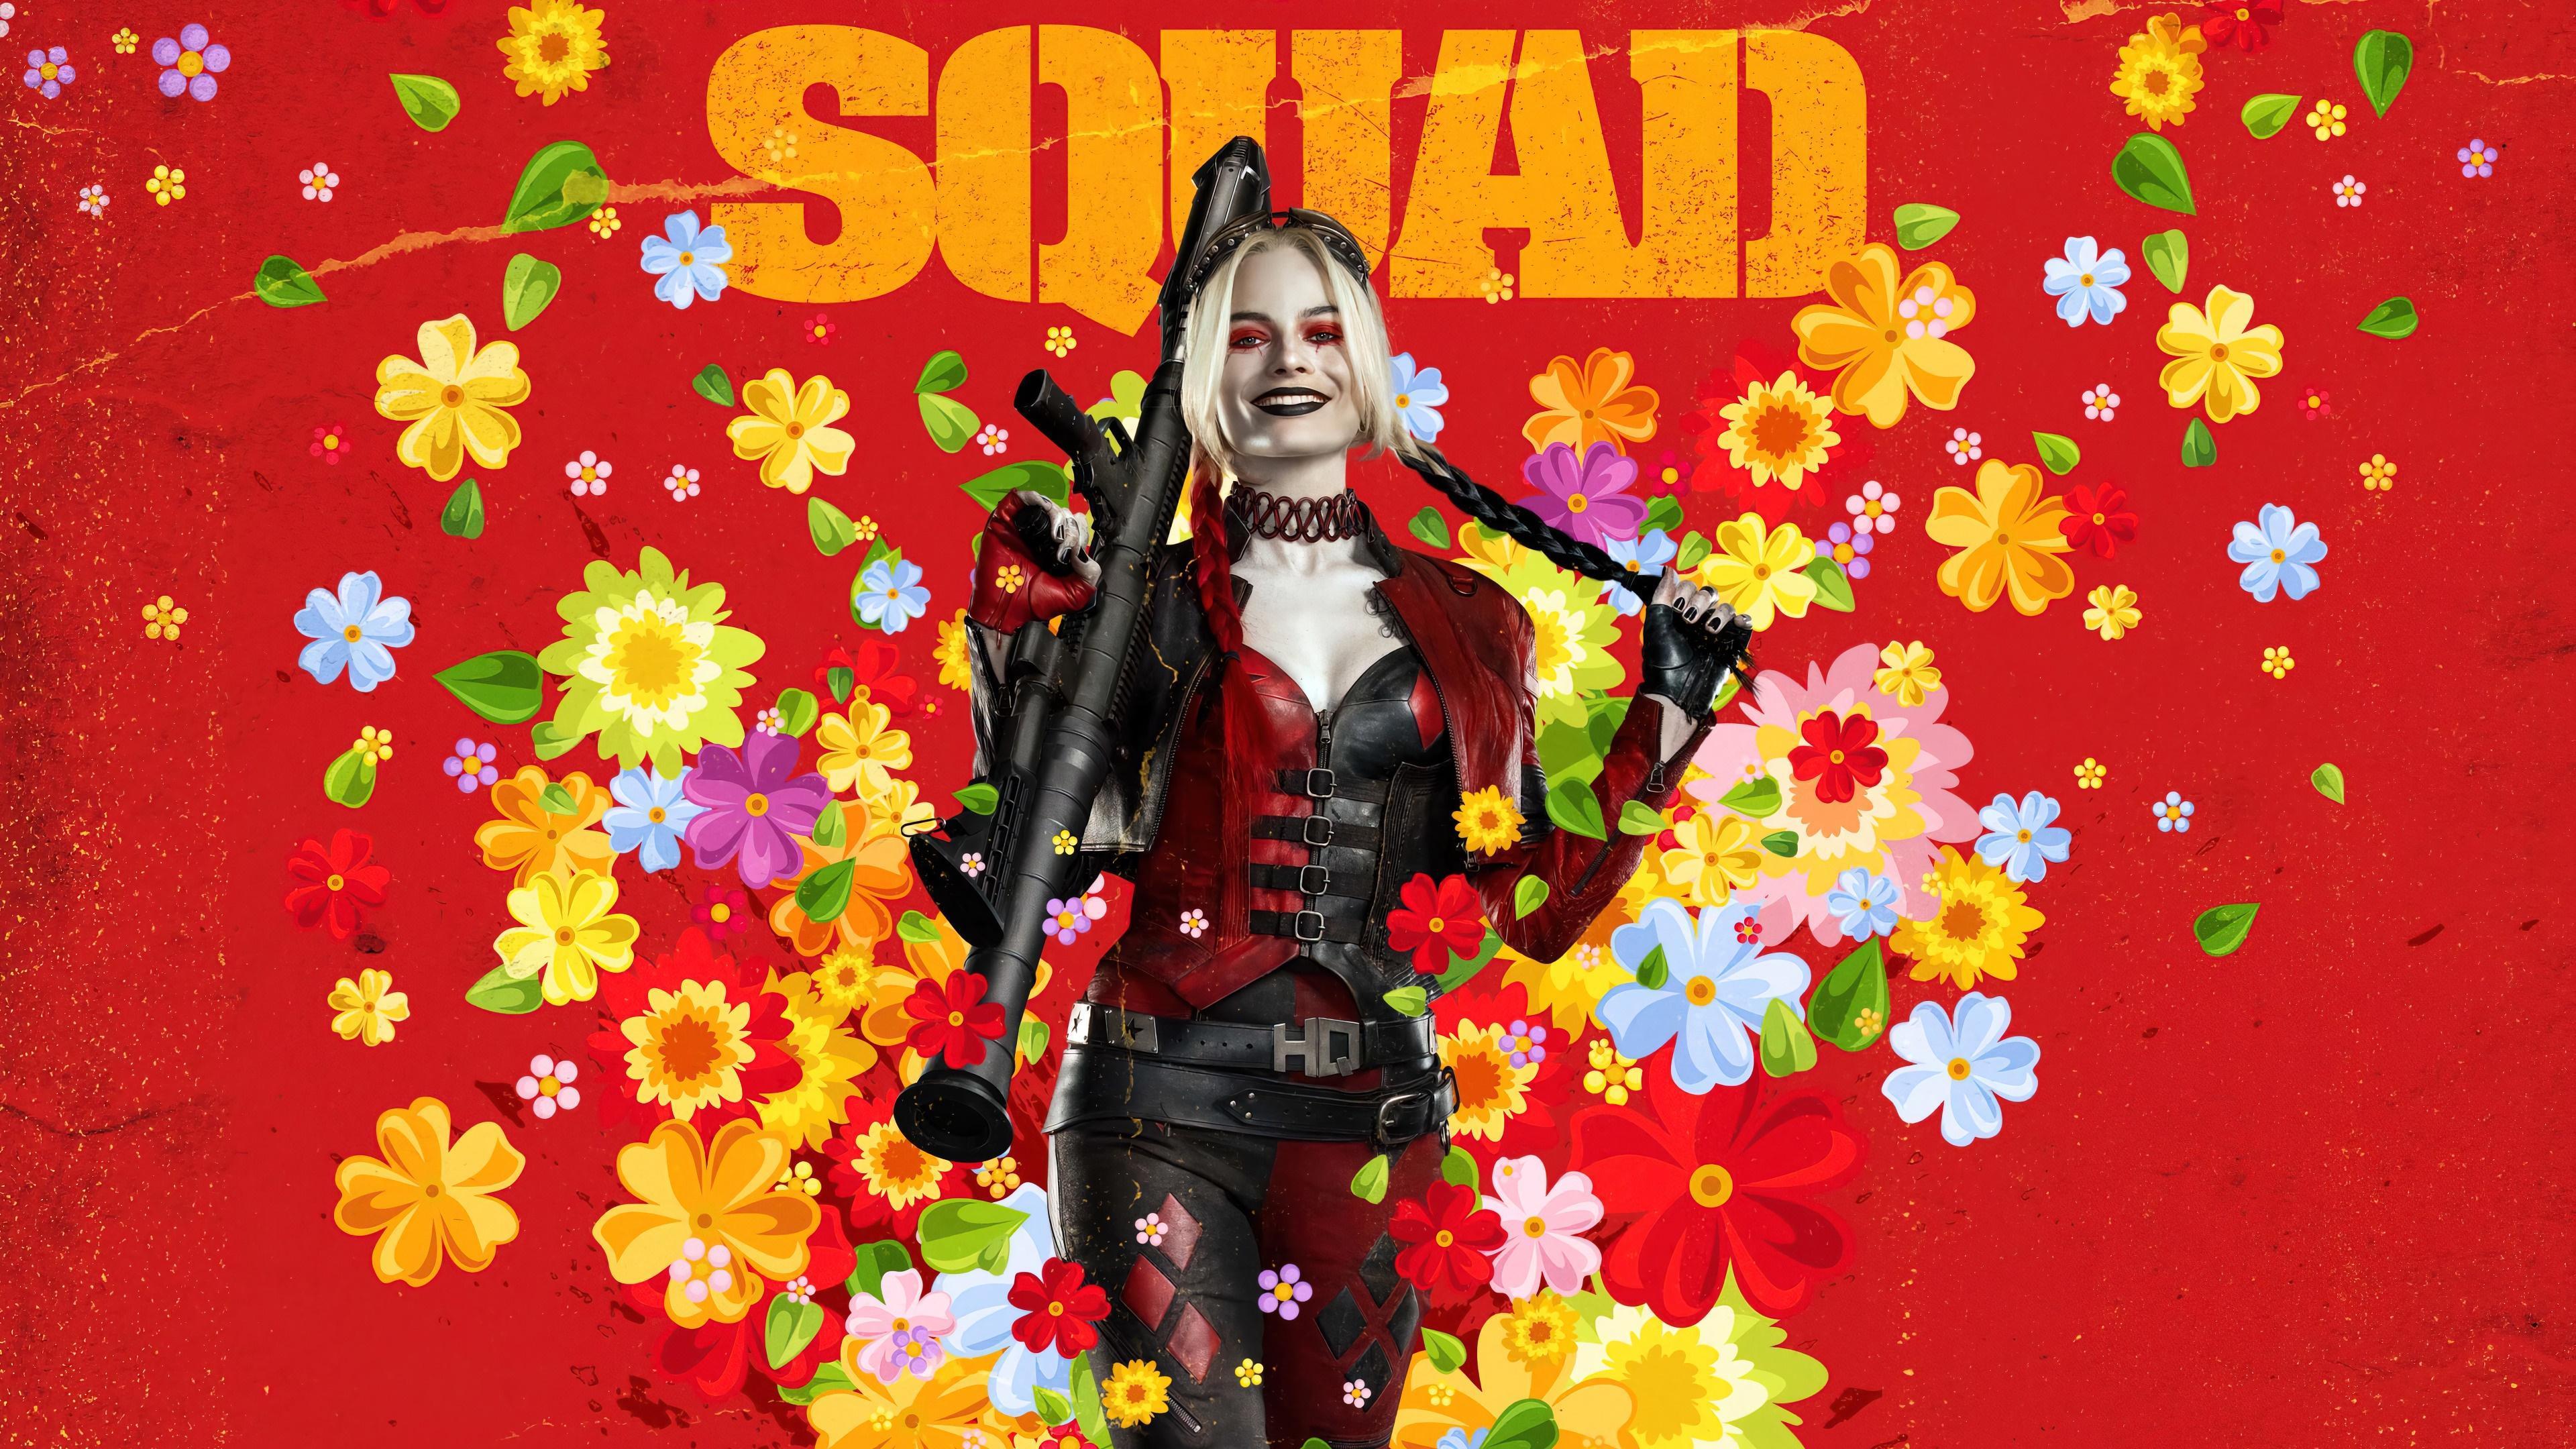 HD wallpaper, Movie, 2021, Hd, Harley Quinn, 4K, Wallpaper, The Suicide Squad, Poster